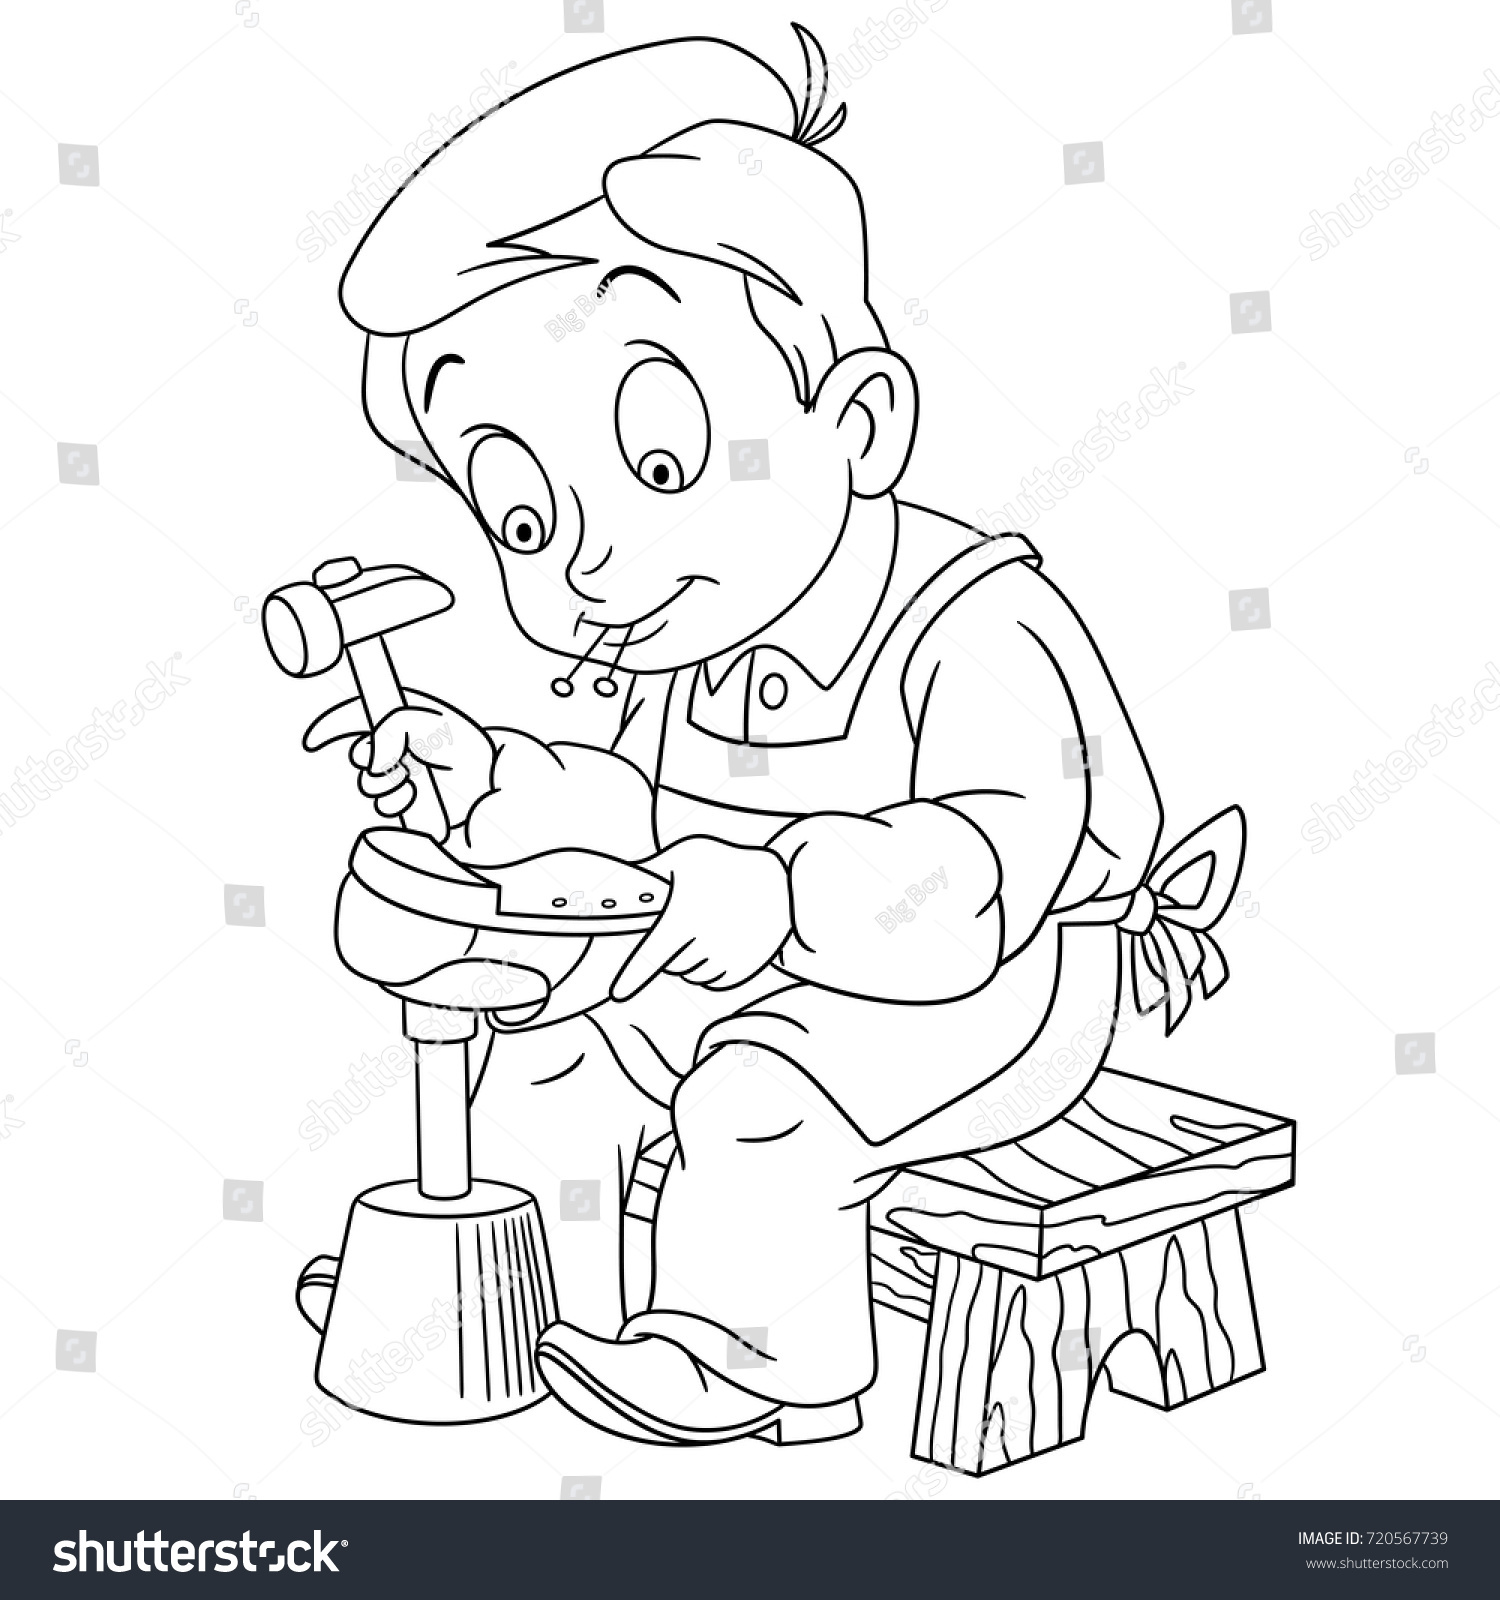 Coloring Page Shoemaker Cobbler Coloring Book Stock Vector 720567739